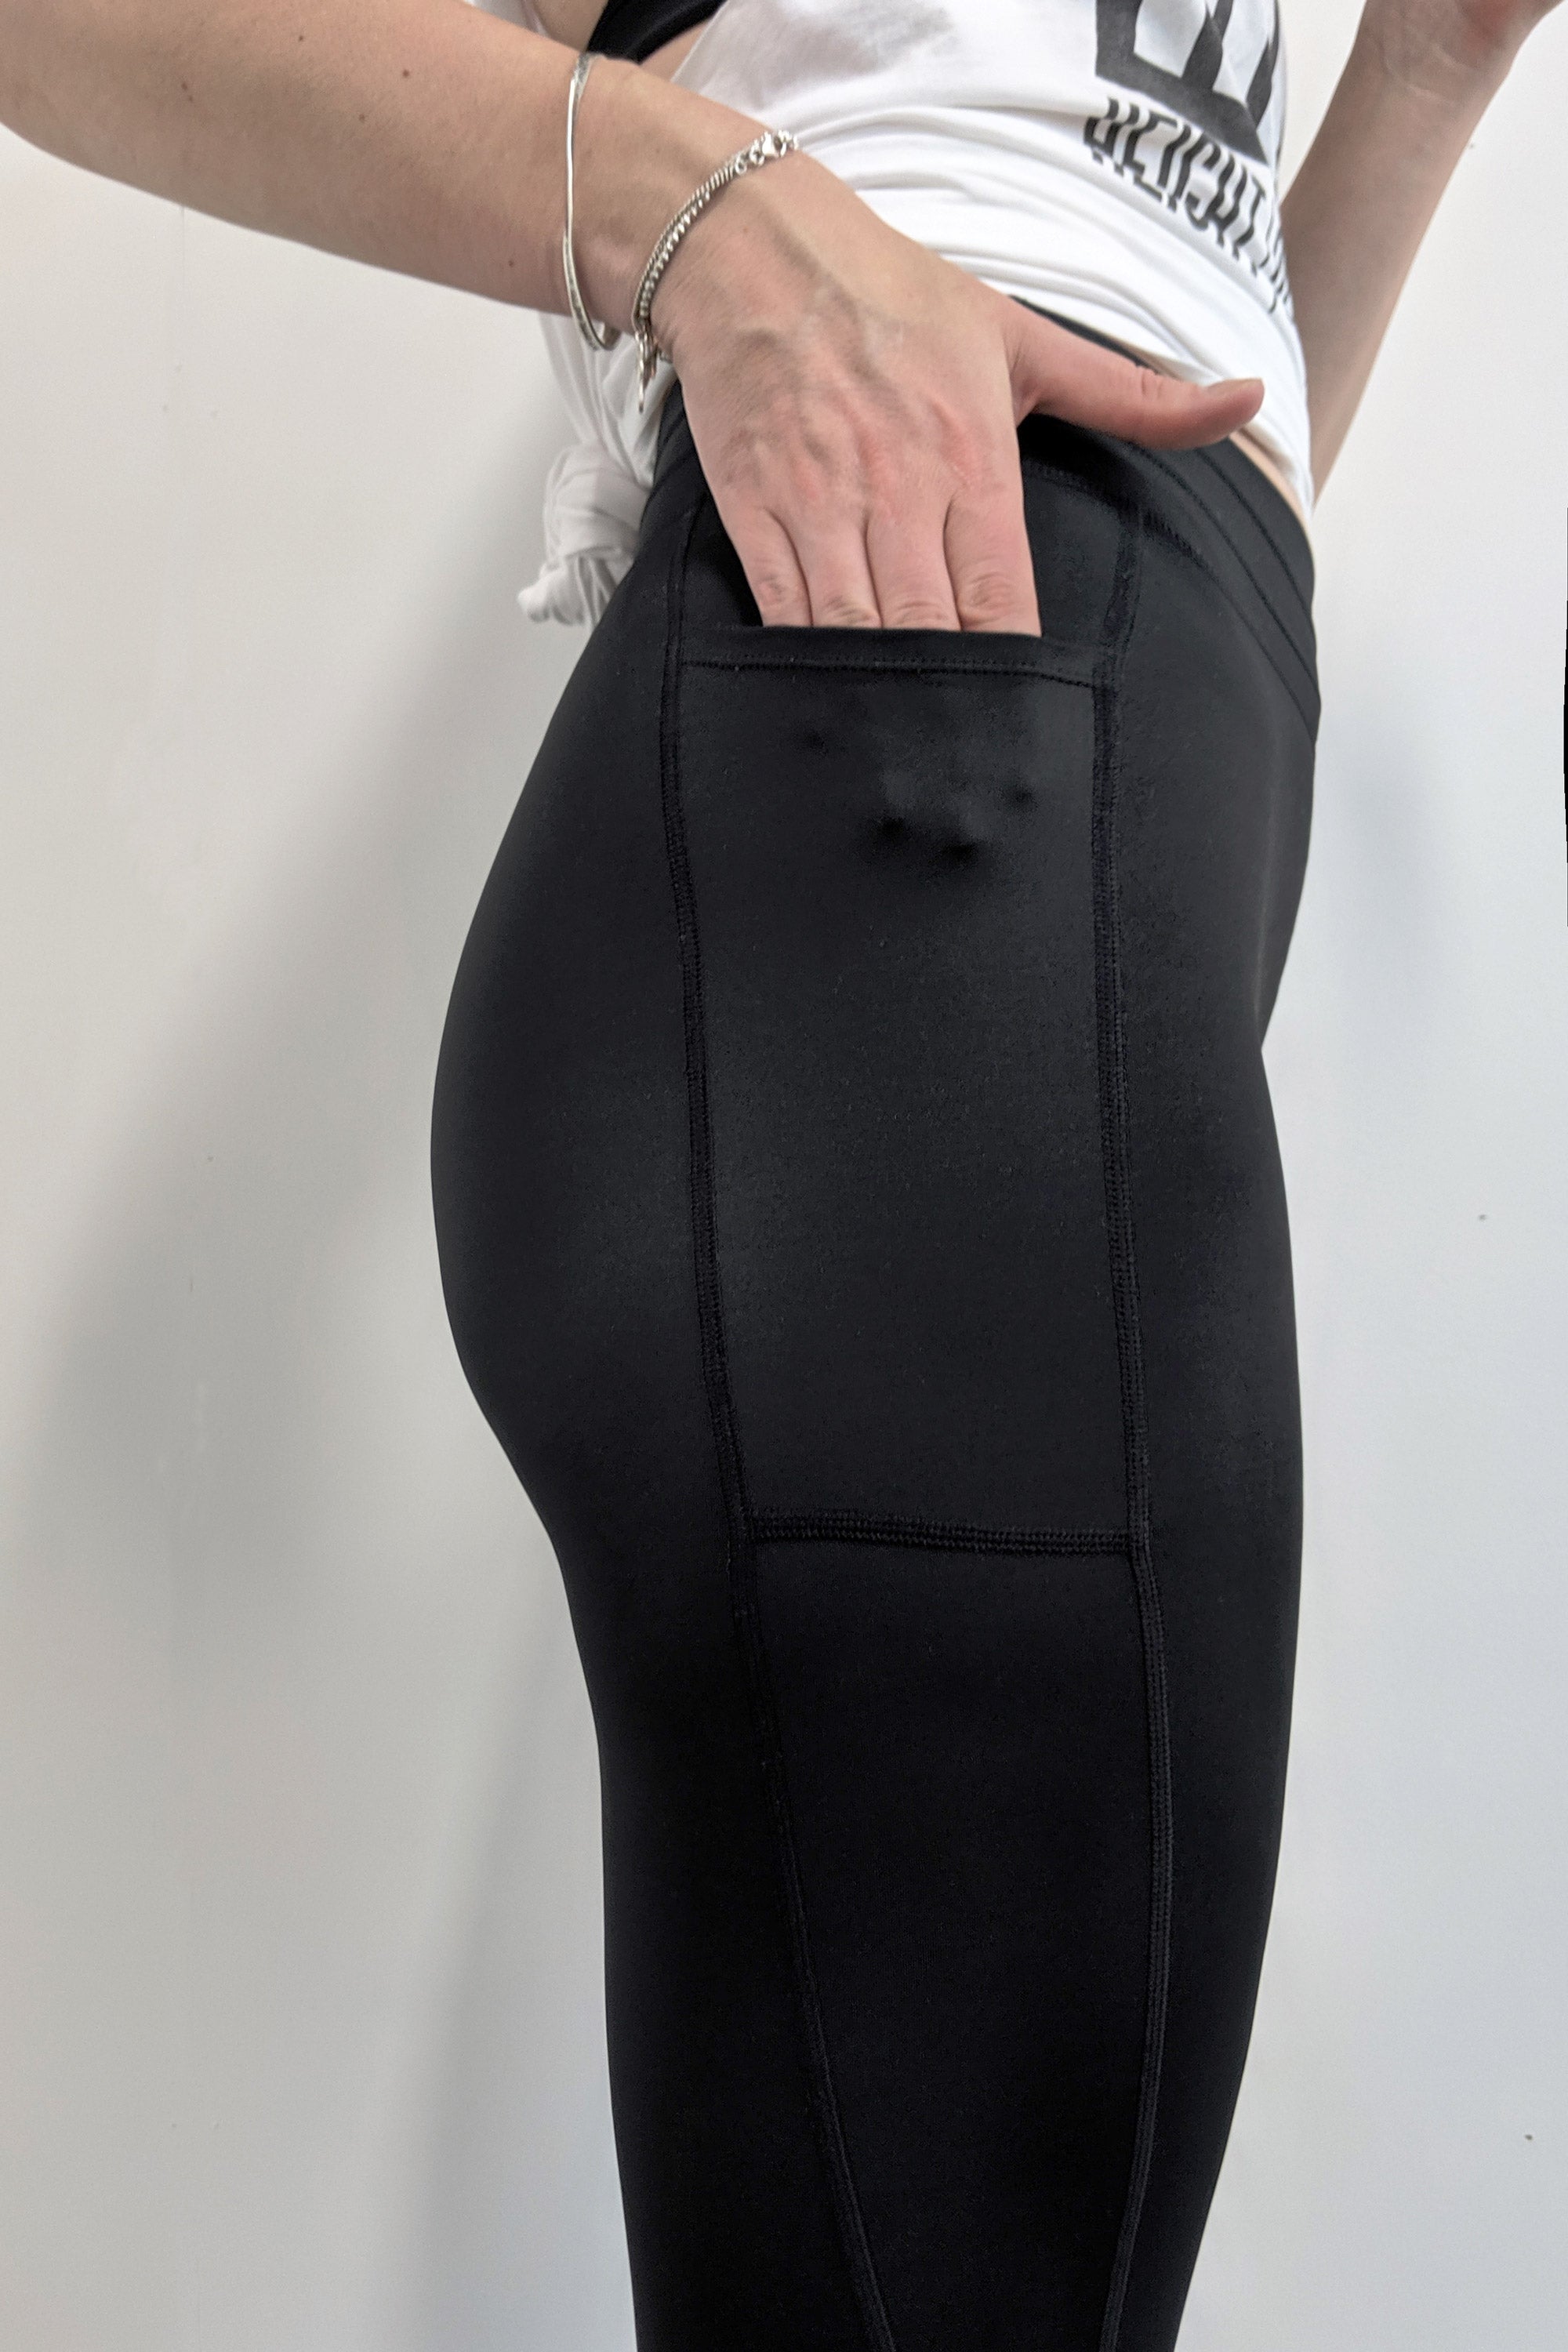 Extra Long Black Stretch Leggings  Made For Tall Women - HEIGHT-OF-FASHION